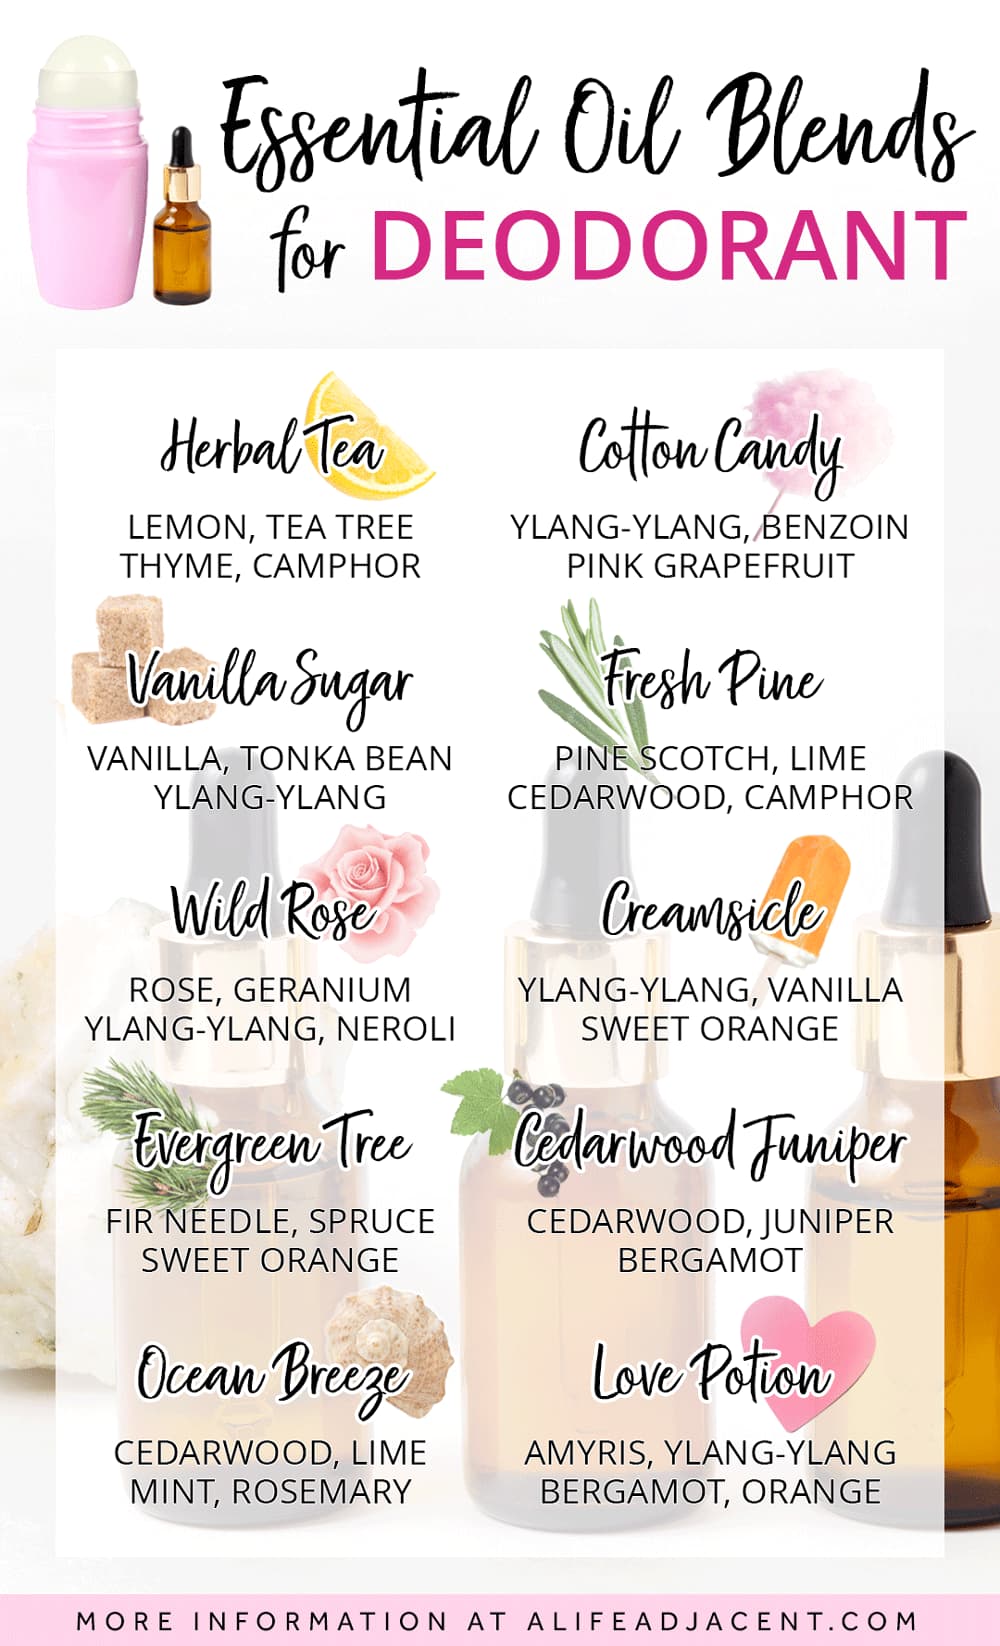 Essential oil blends for deodorant infographic.